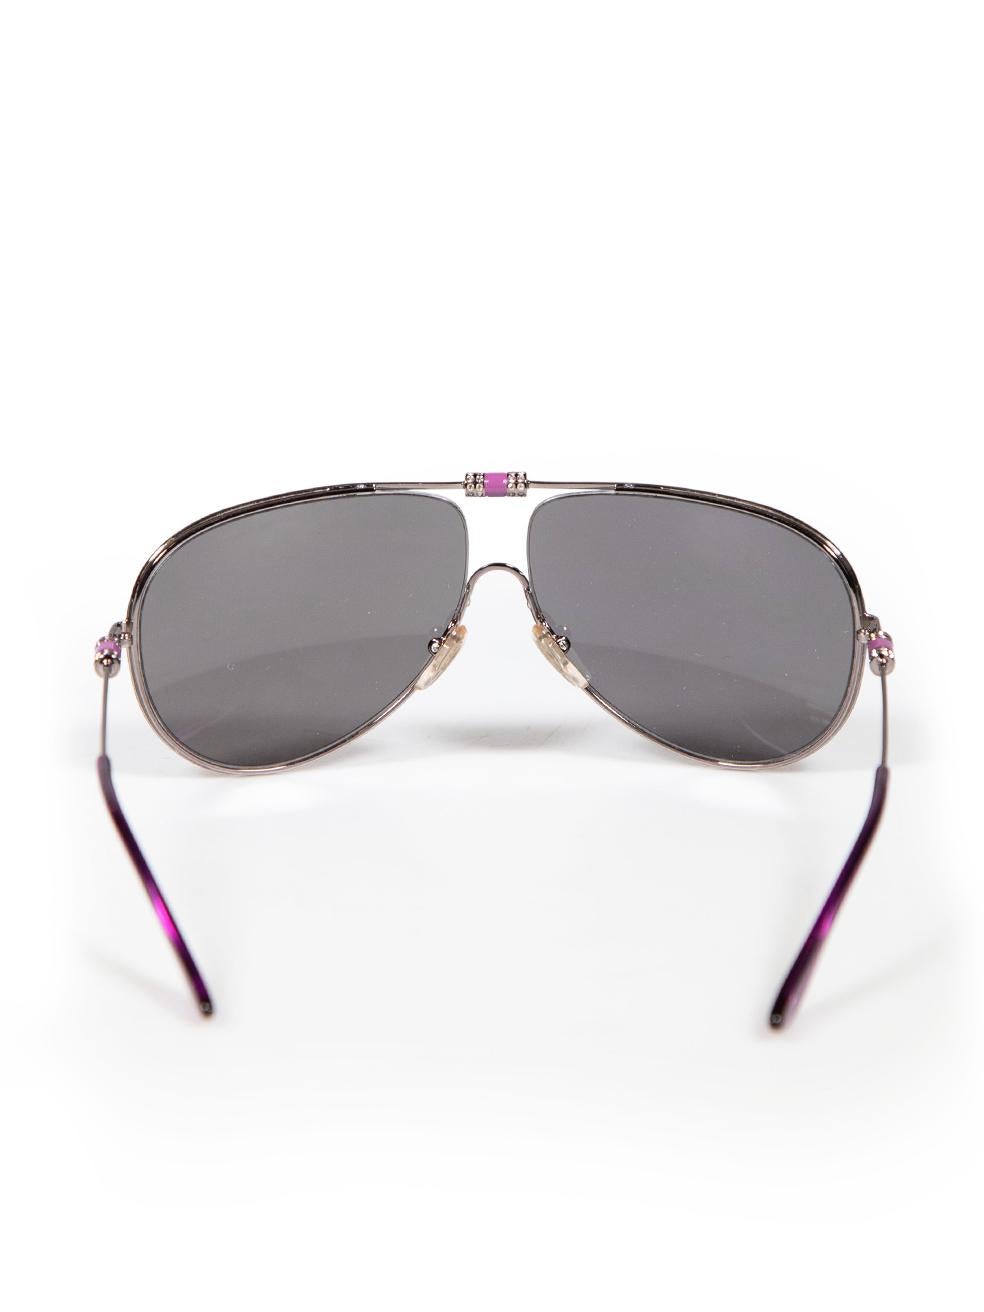 Saint Laurent Purple Embellished Aviator Sunglasses In Good Condition For Sale In London, GB